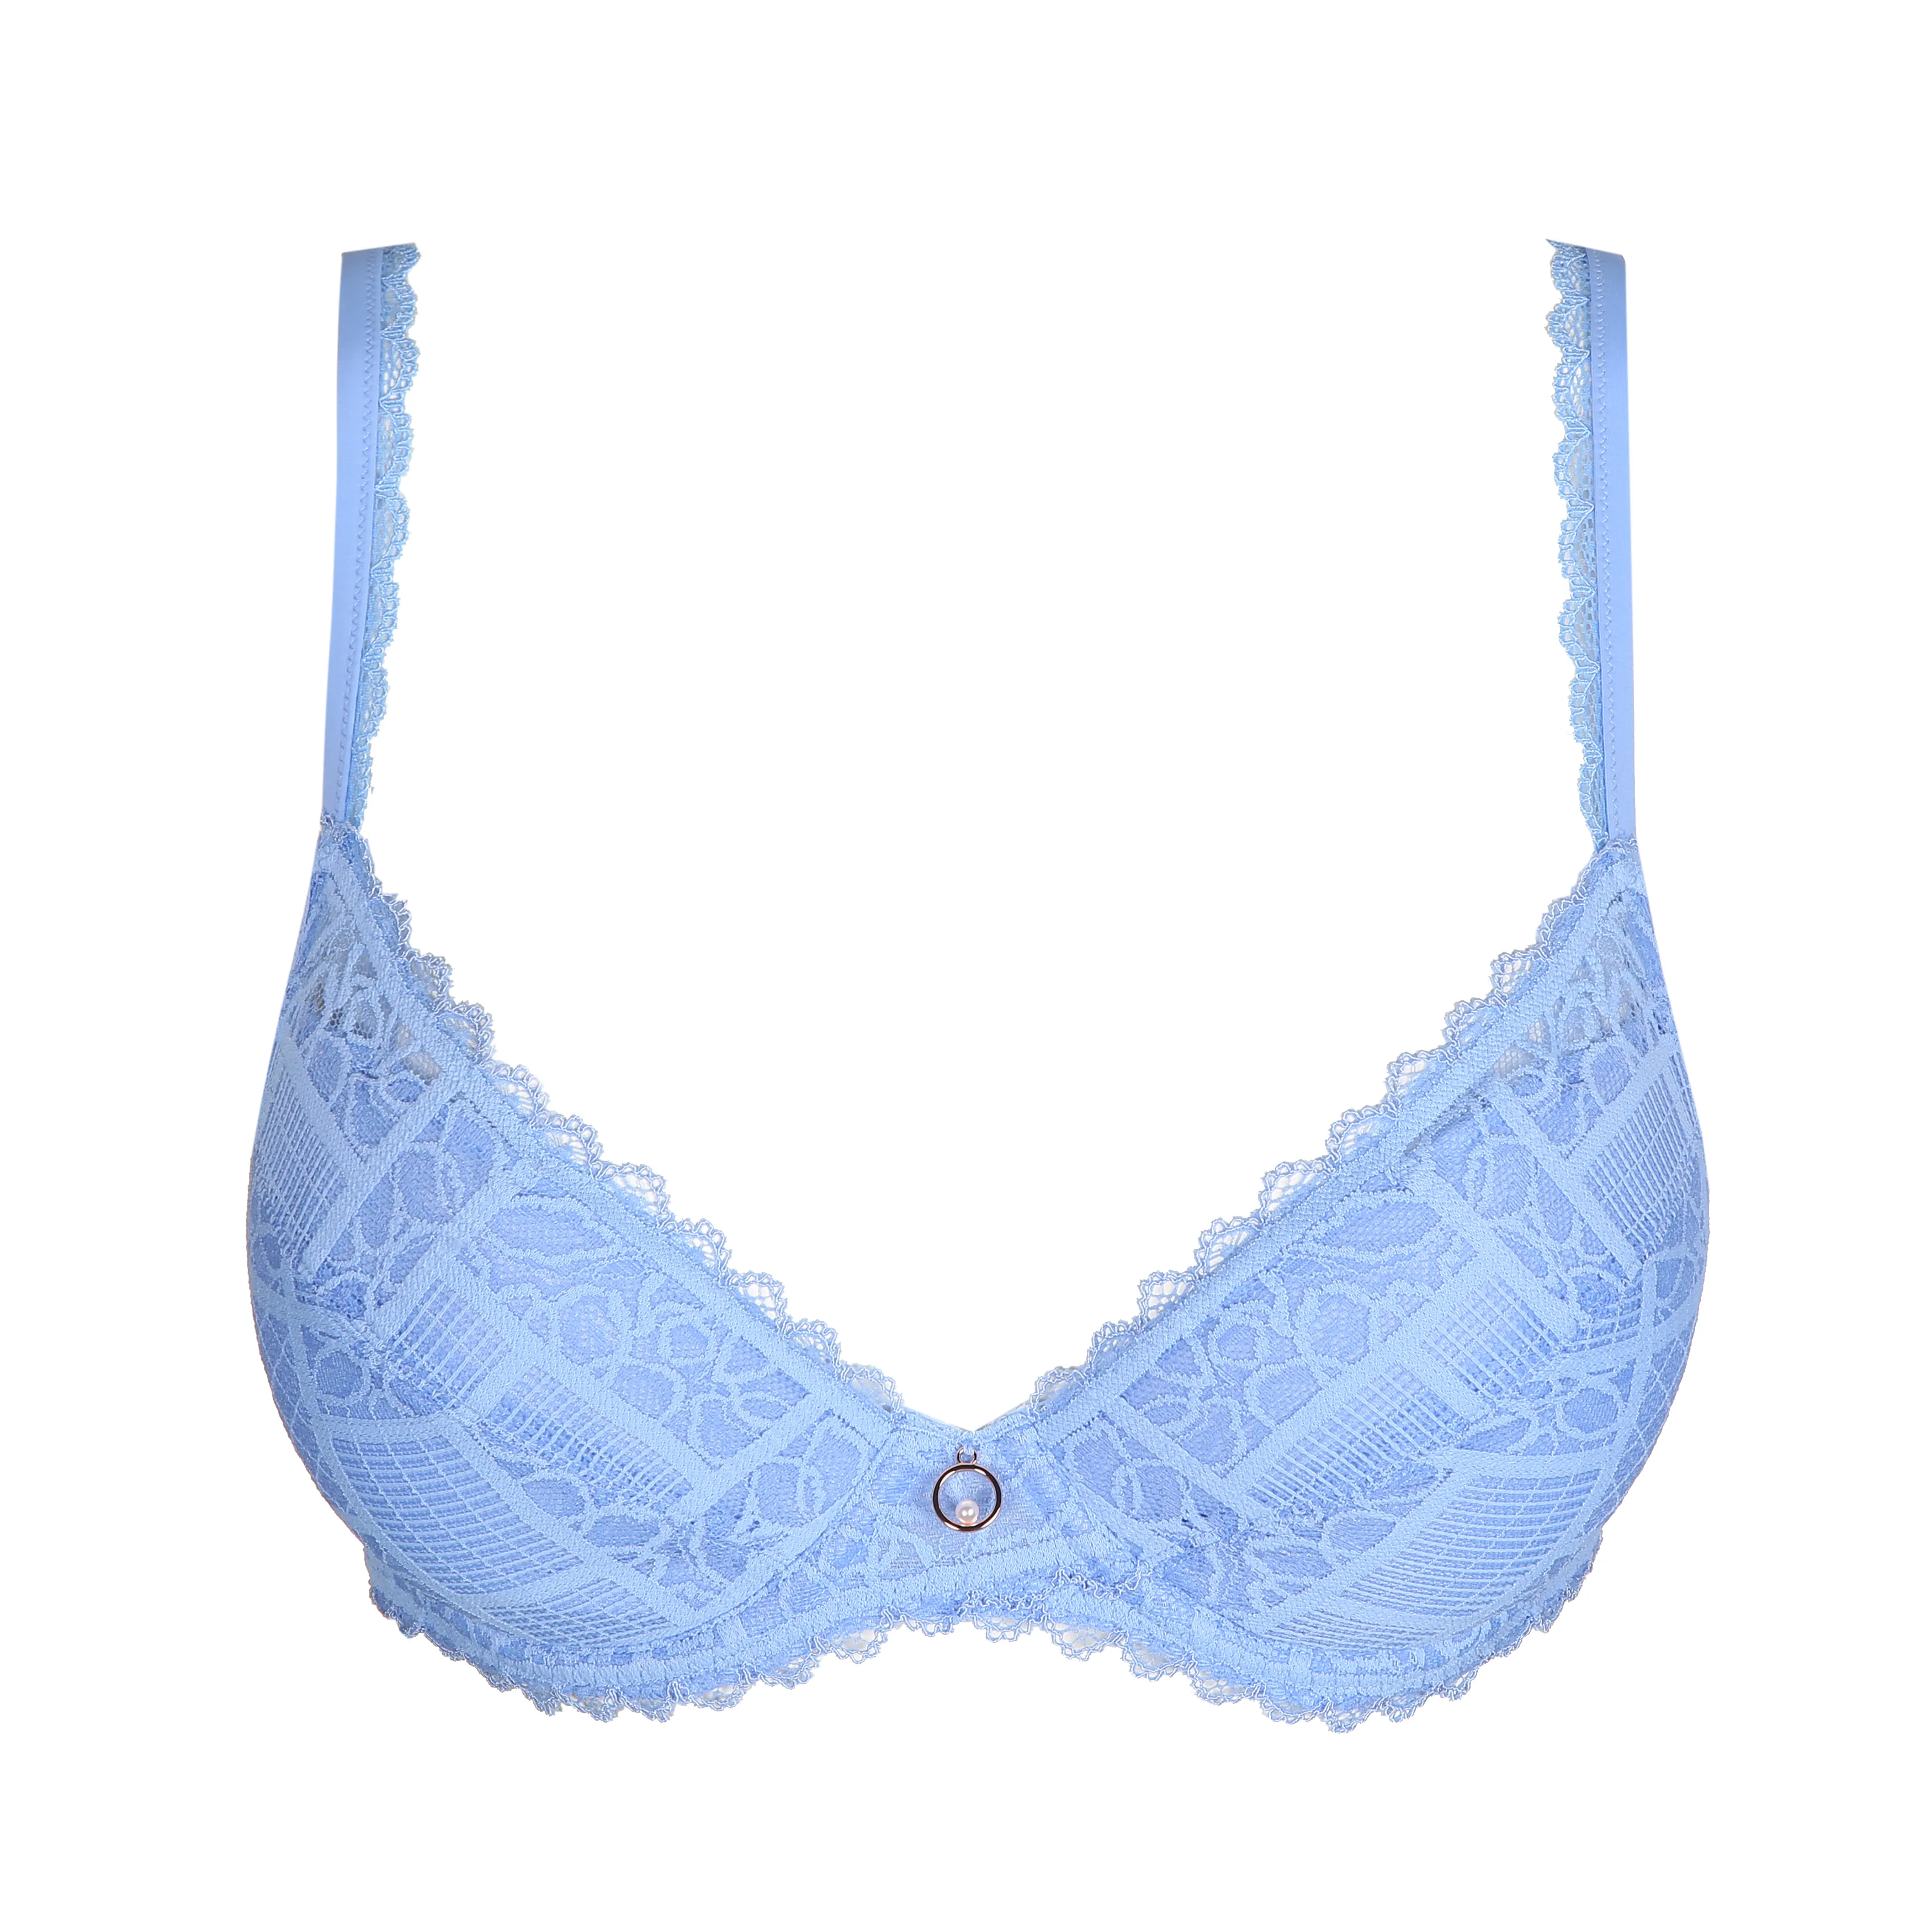 Marie Jo Jadei Open Air Push Up Bra Removable Pads